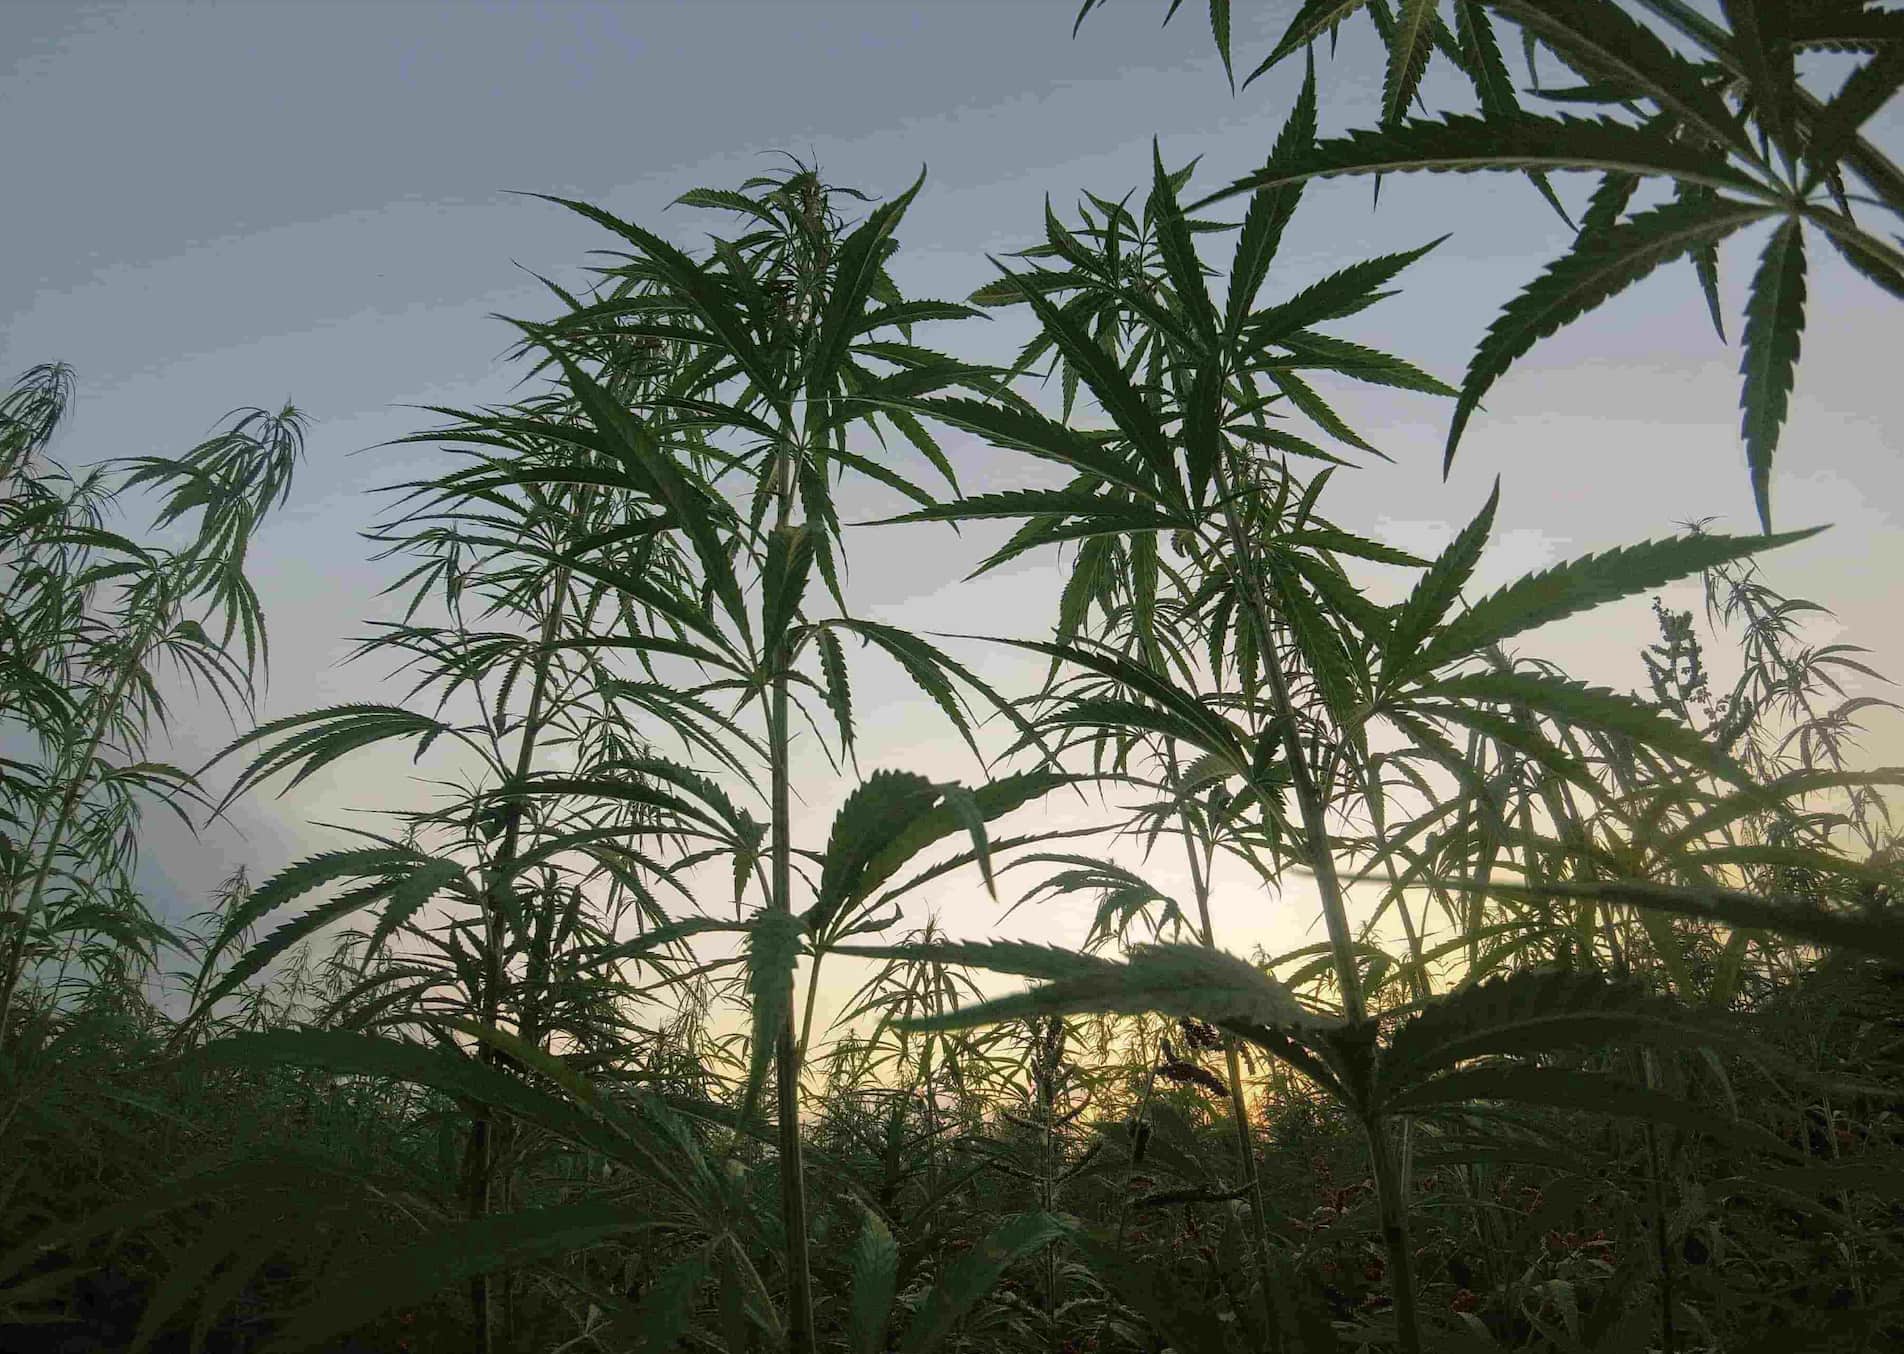 Upward angle photograph of cannabis plants with a light blue and purple sky in the background